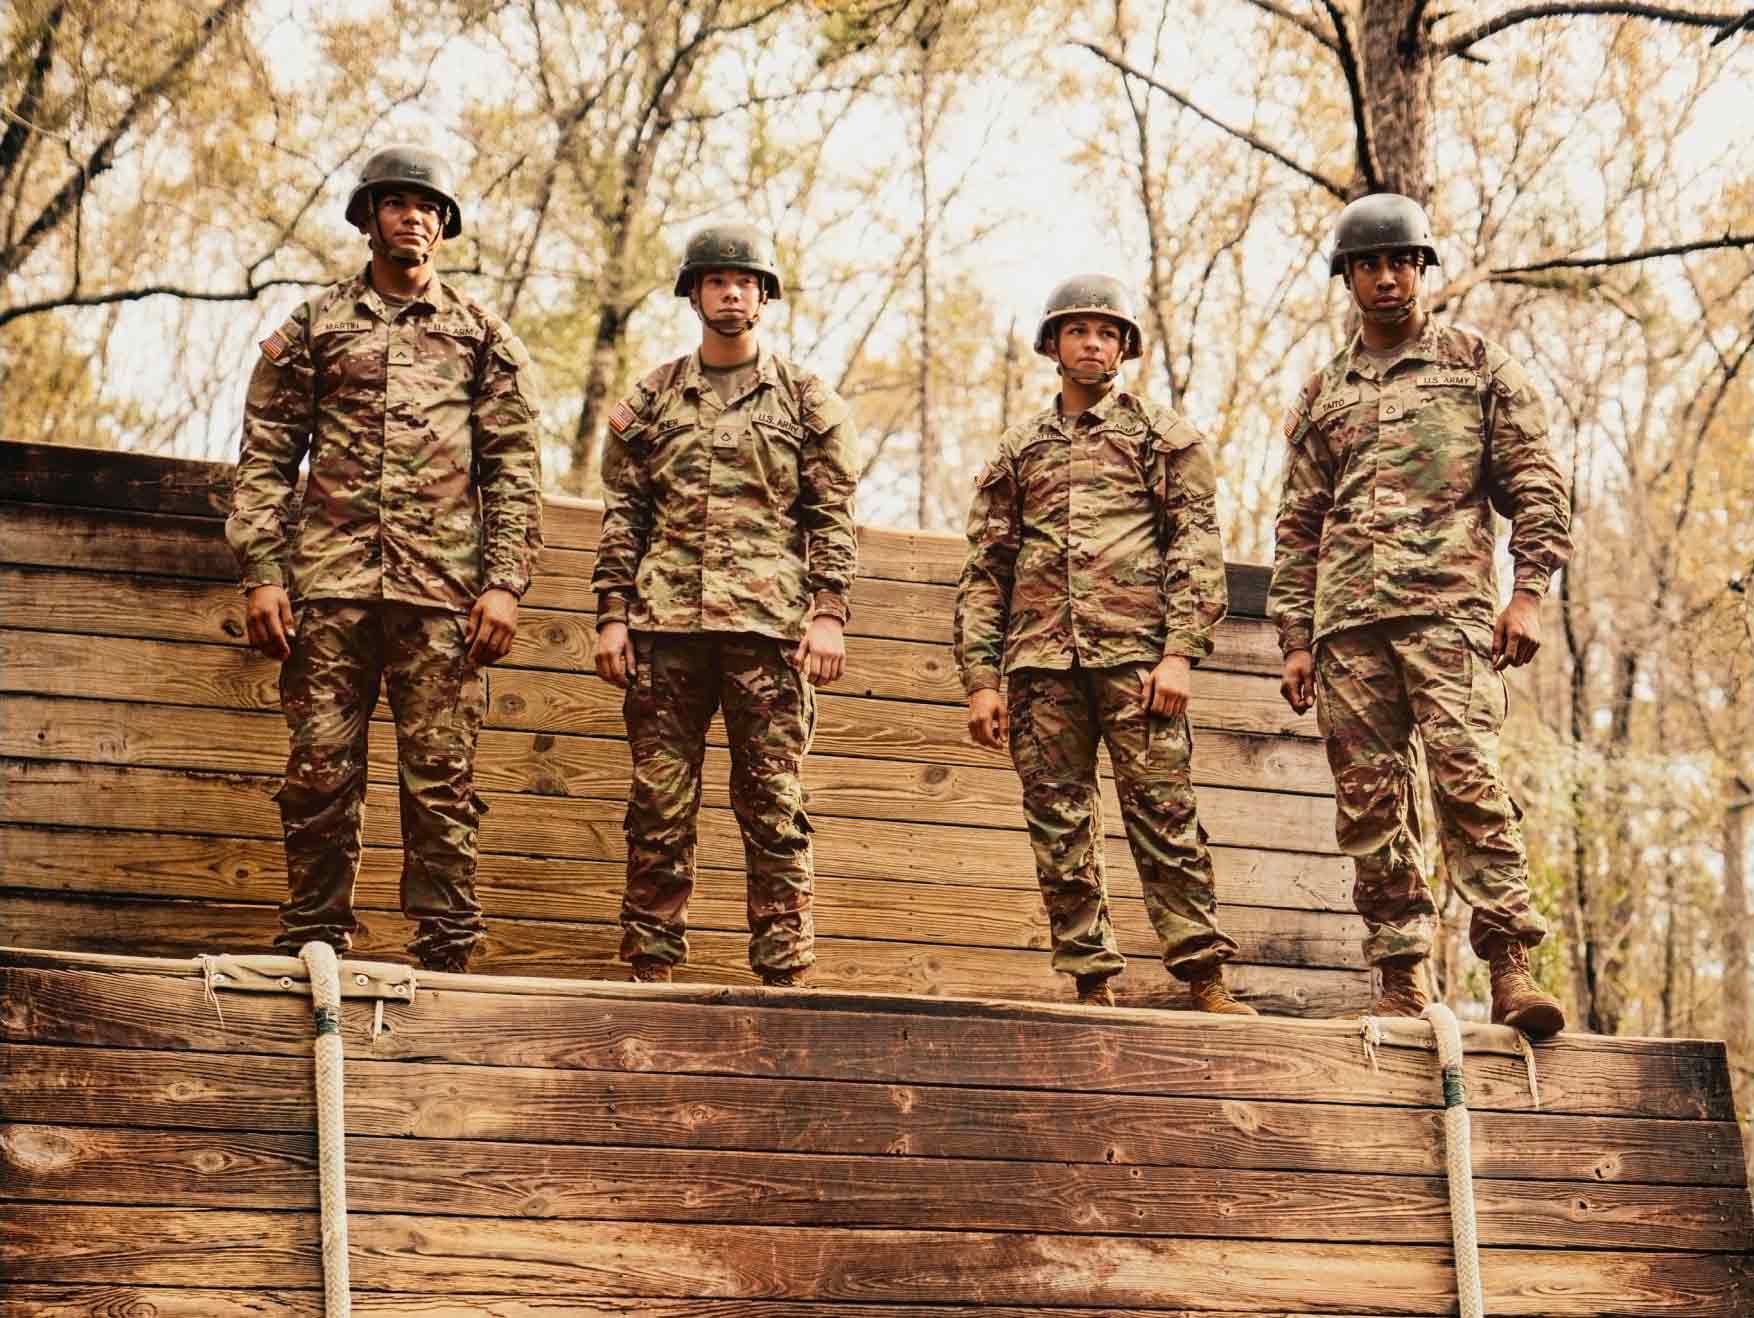 Four Soldiers in combat uniform standing on a wooden obstacle outdoors